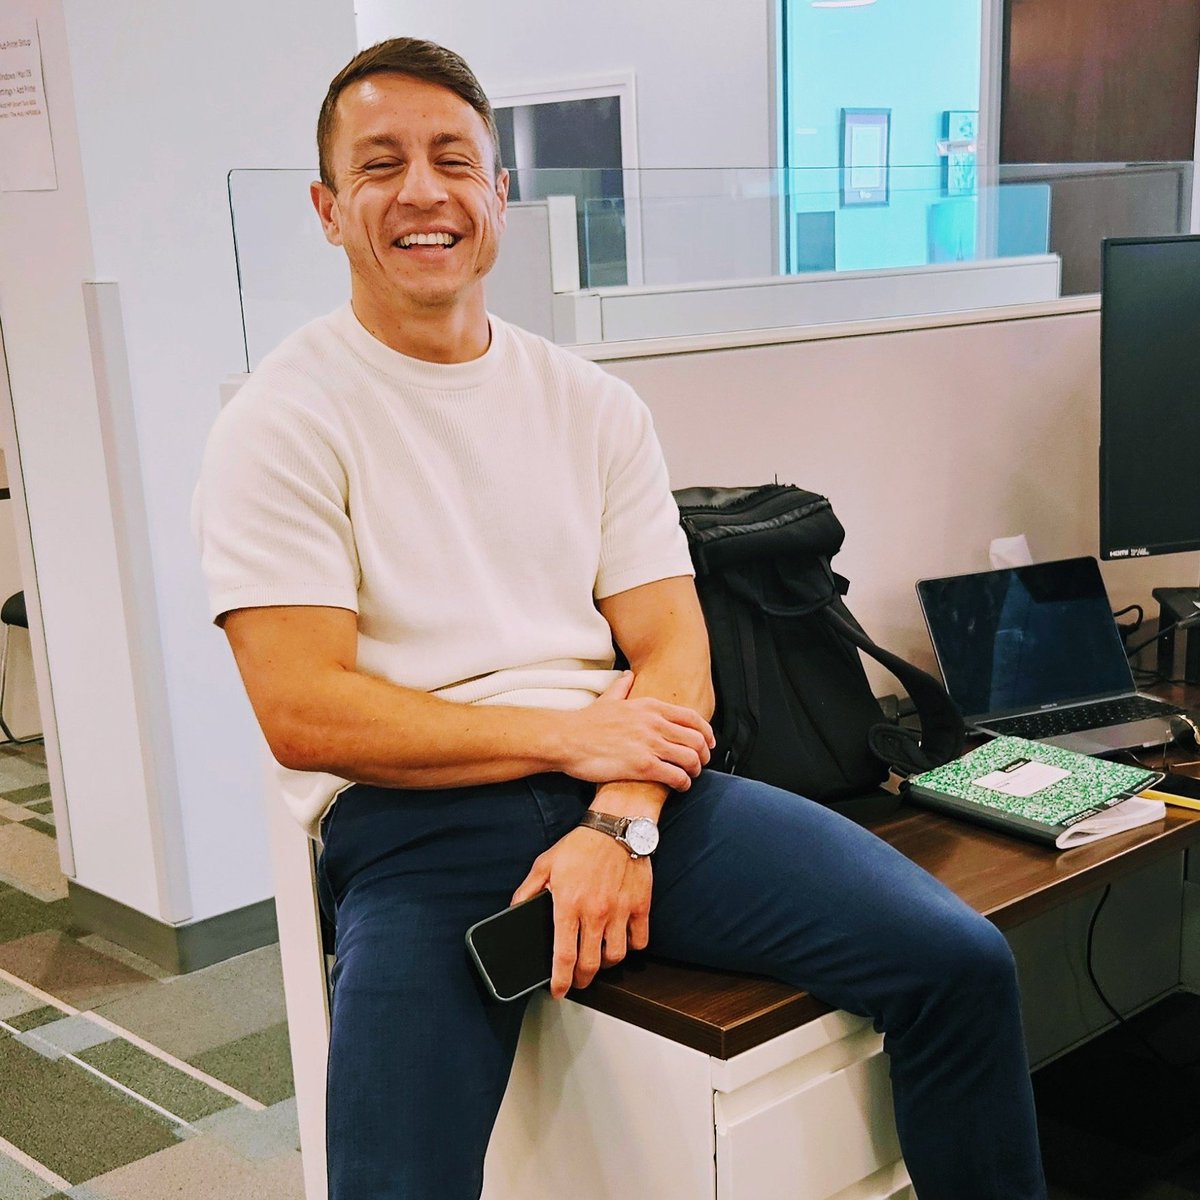 Did you know, that in addition to helping e-commerce brands improve their ad targeting with credit card spend data at @GoAudiences , @altay_your_shoe is also a part time male model! 👀😂
#Miami #miamitech